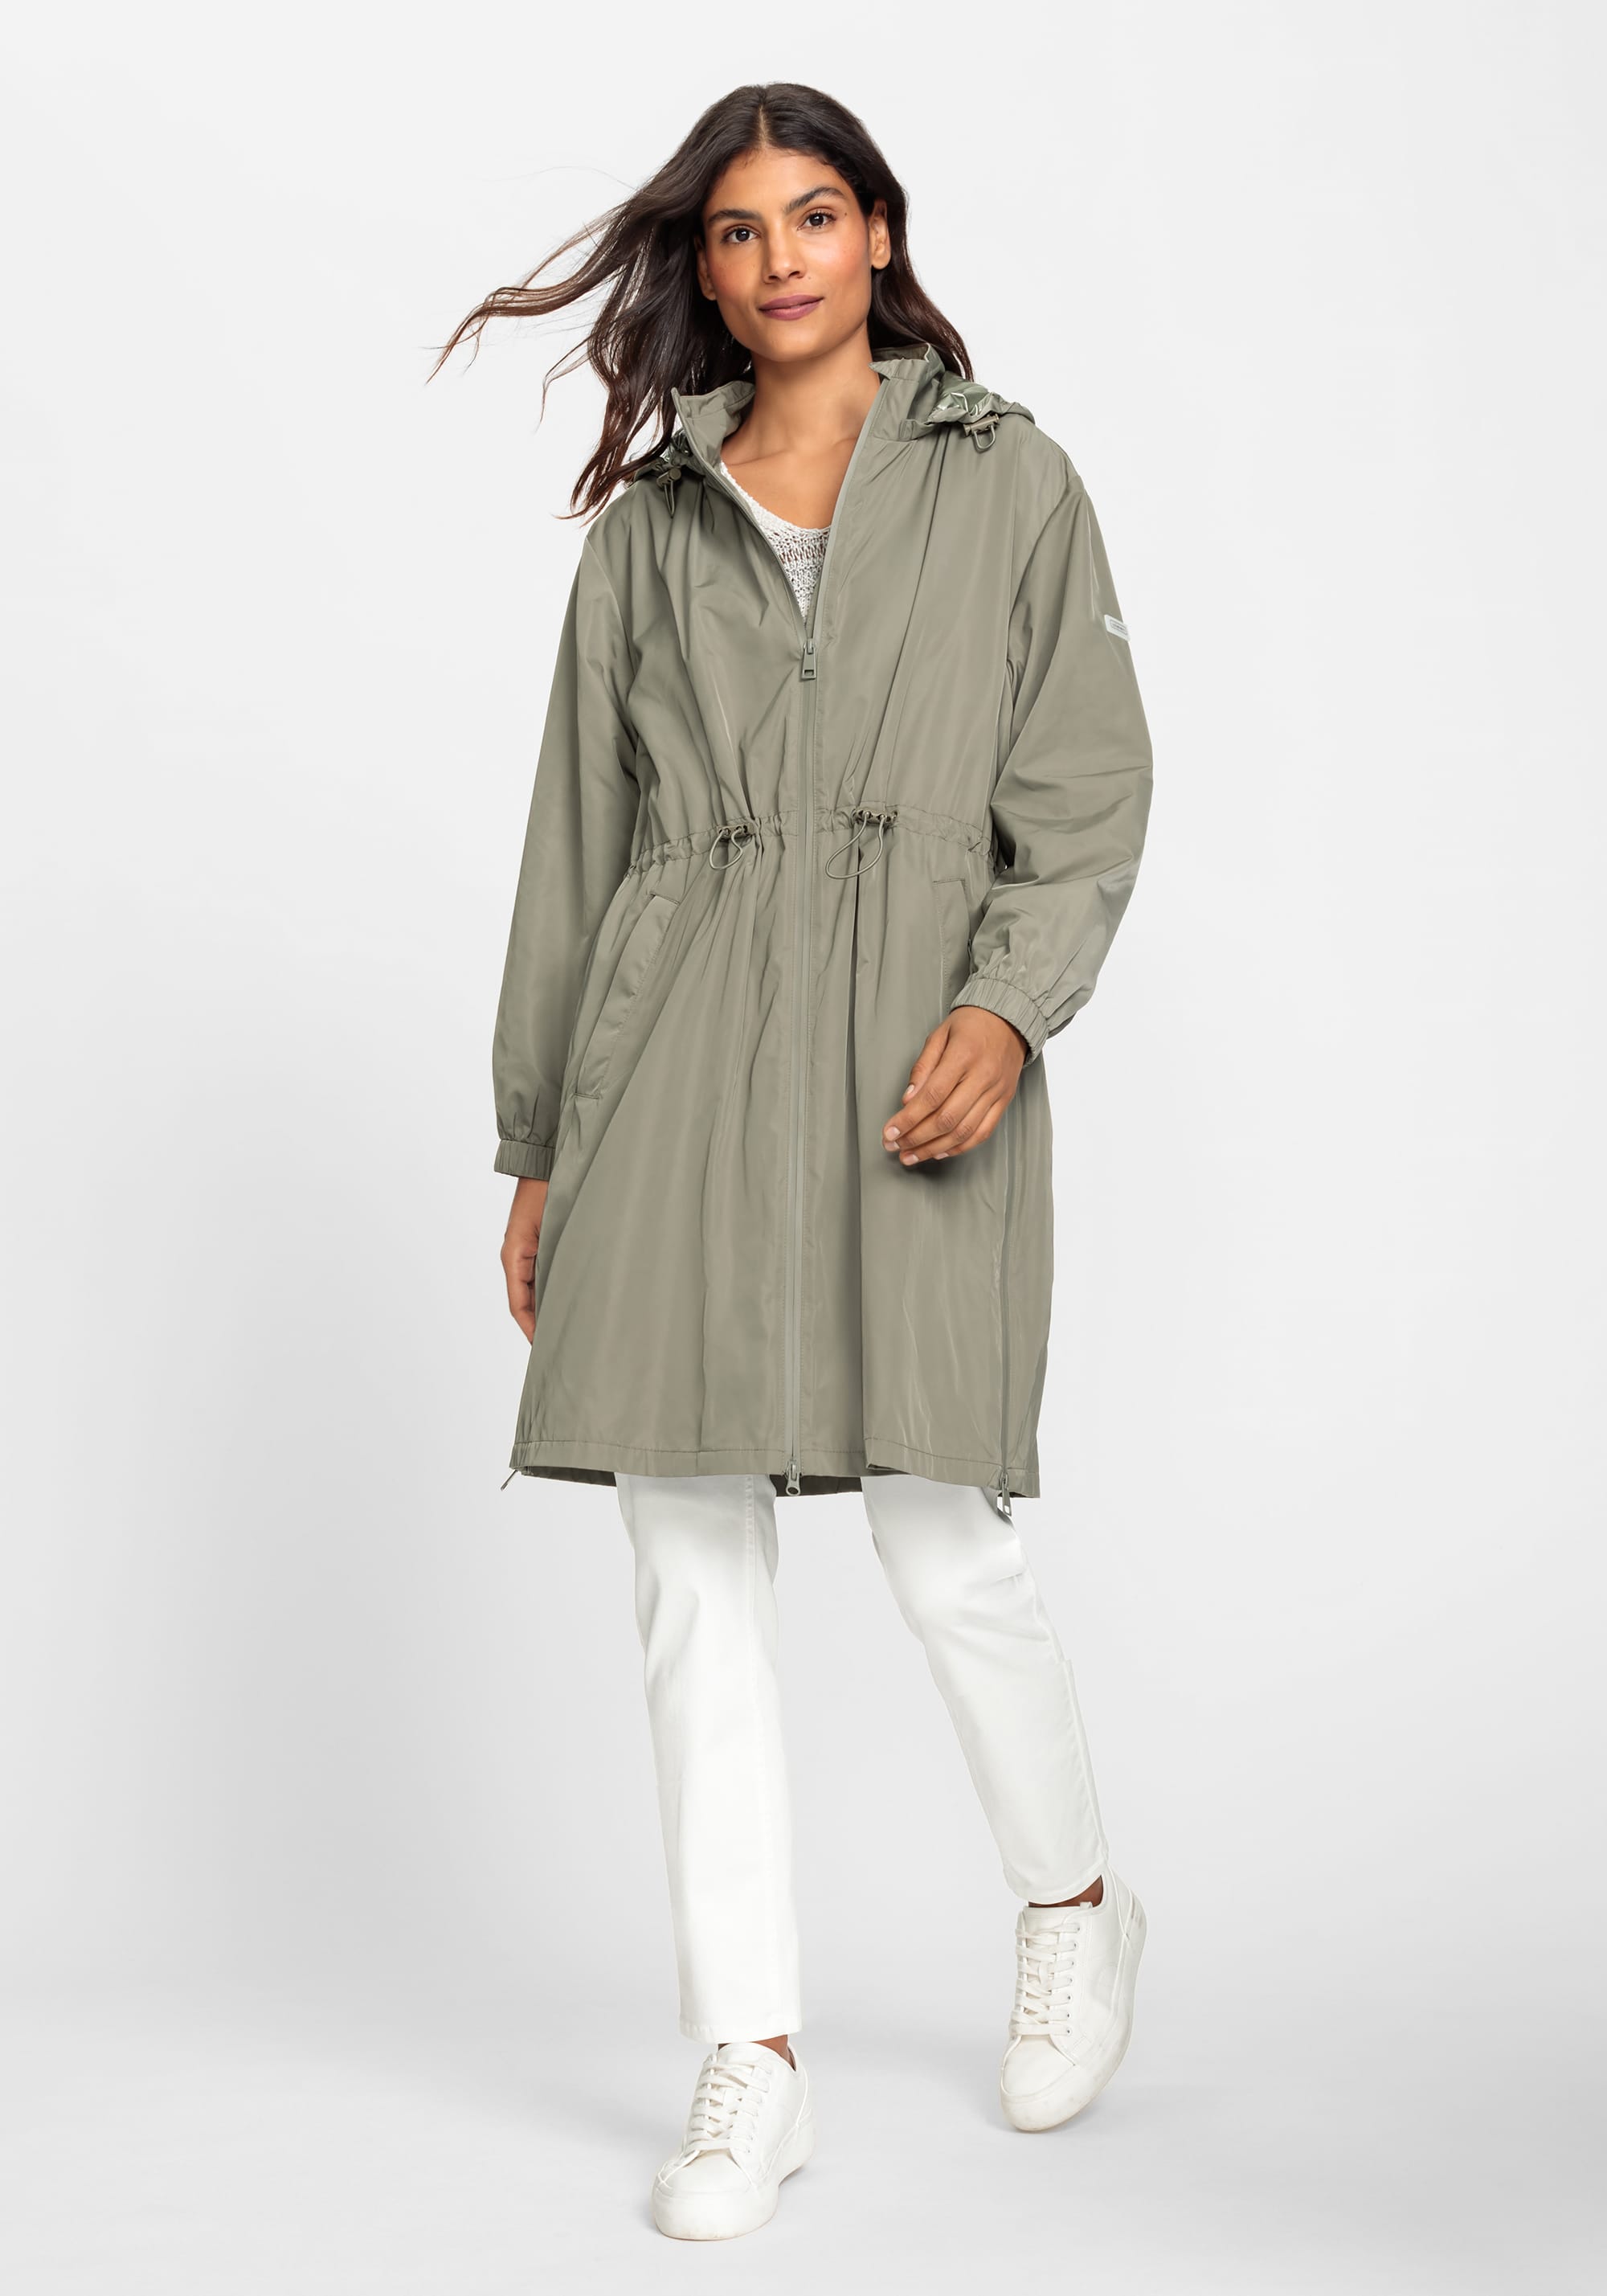 Anorak Jacket with Removable Hood - Olsen Fashion Canada